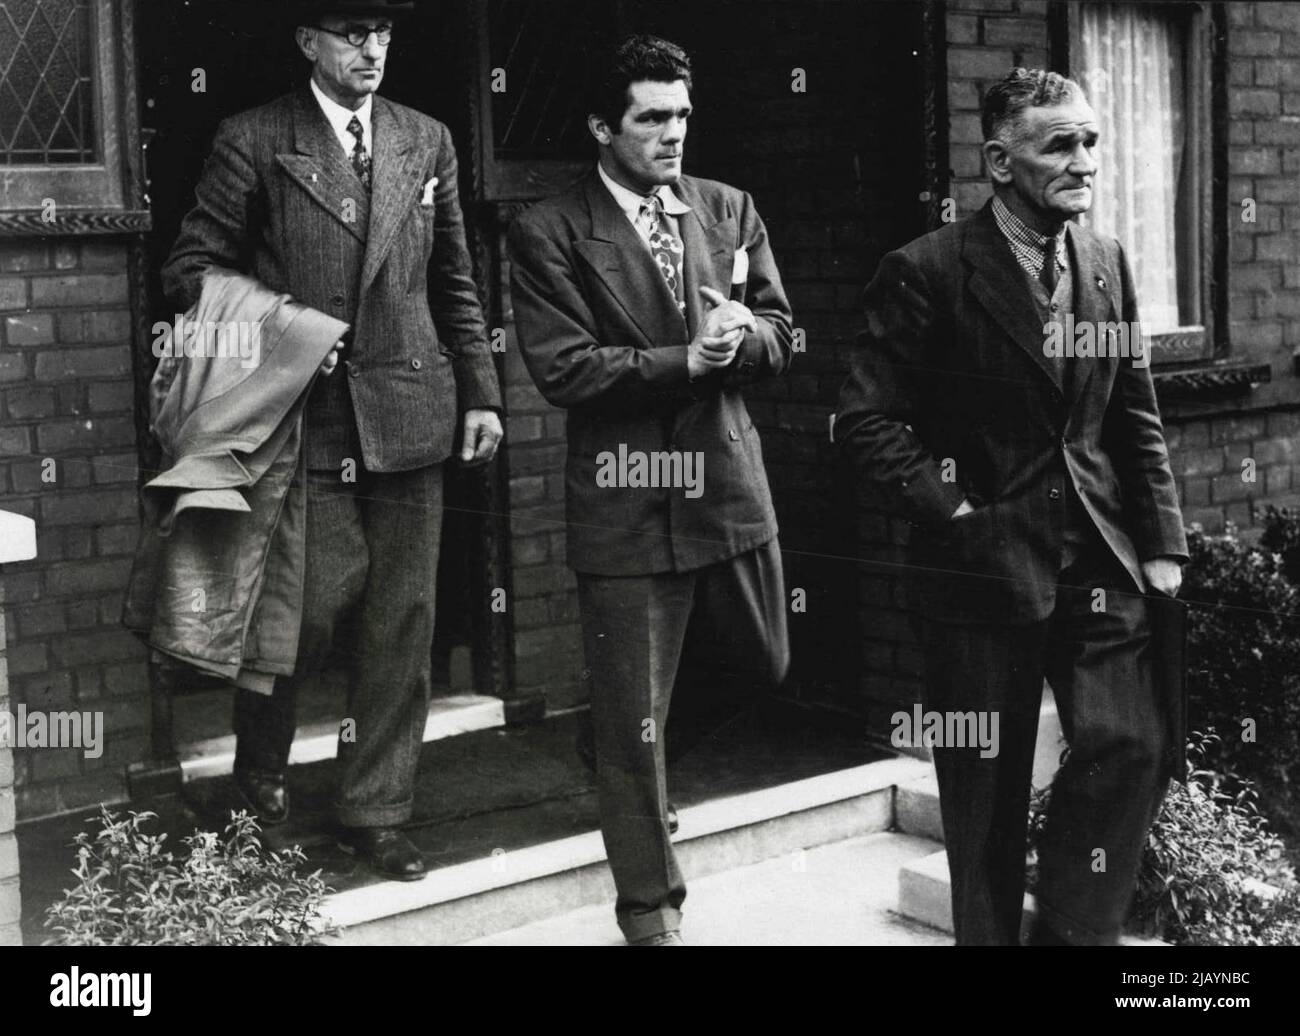 Champion Sees Specialist -- Freddie Mills (centre) ***** manager Ted Broadribb (right), carrying the champion's X-Ray films - and an official of the British Boxing Board of Control, leaving to see a London special list this evening. Freddie Mills 28-year-old world light heavyweight boxing champion was told to-night the ***** will be able to box again. so he ***** not, as feared, have to give up ***** ring through spinal injuries. August 20, 1948. Stock Photo